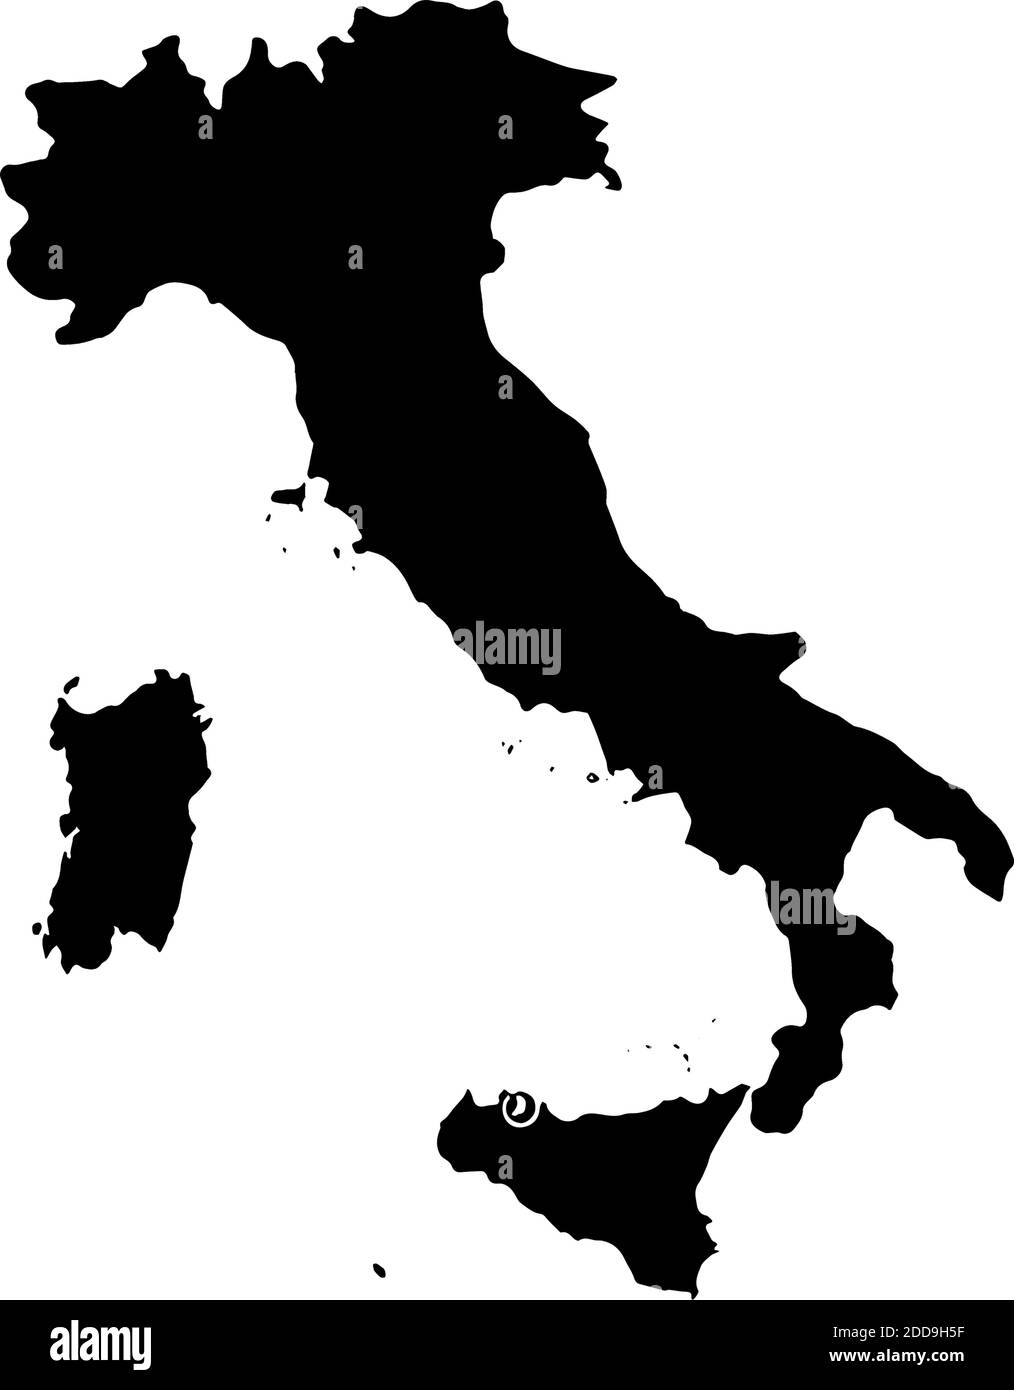 Italy country map vector illustration isolated black Stock Vector